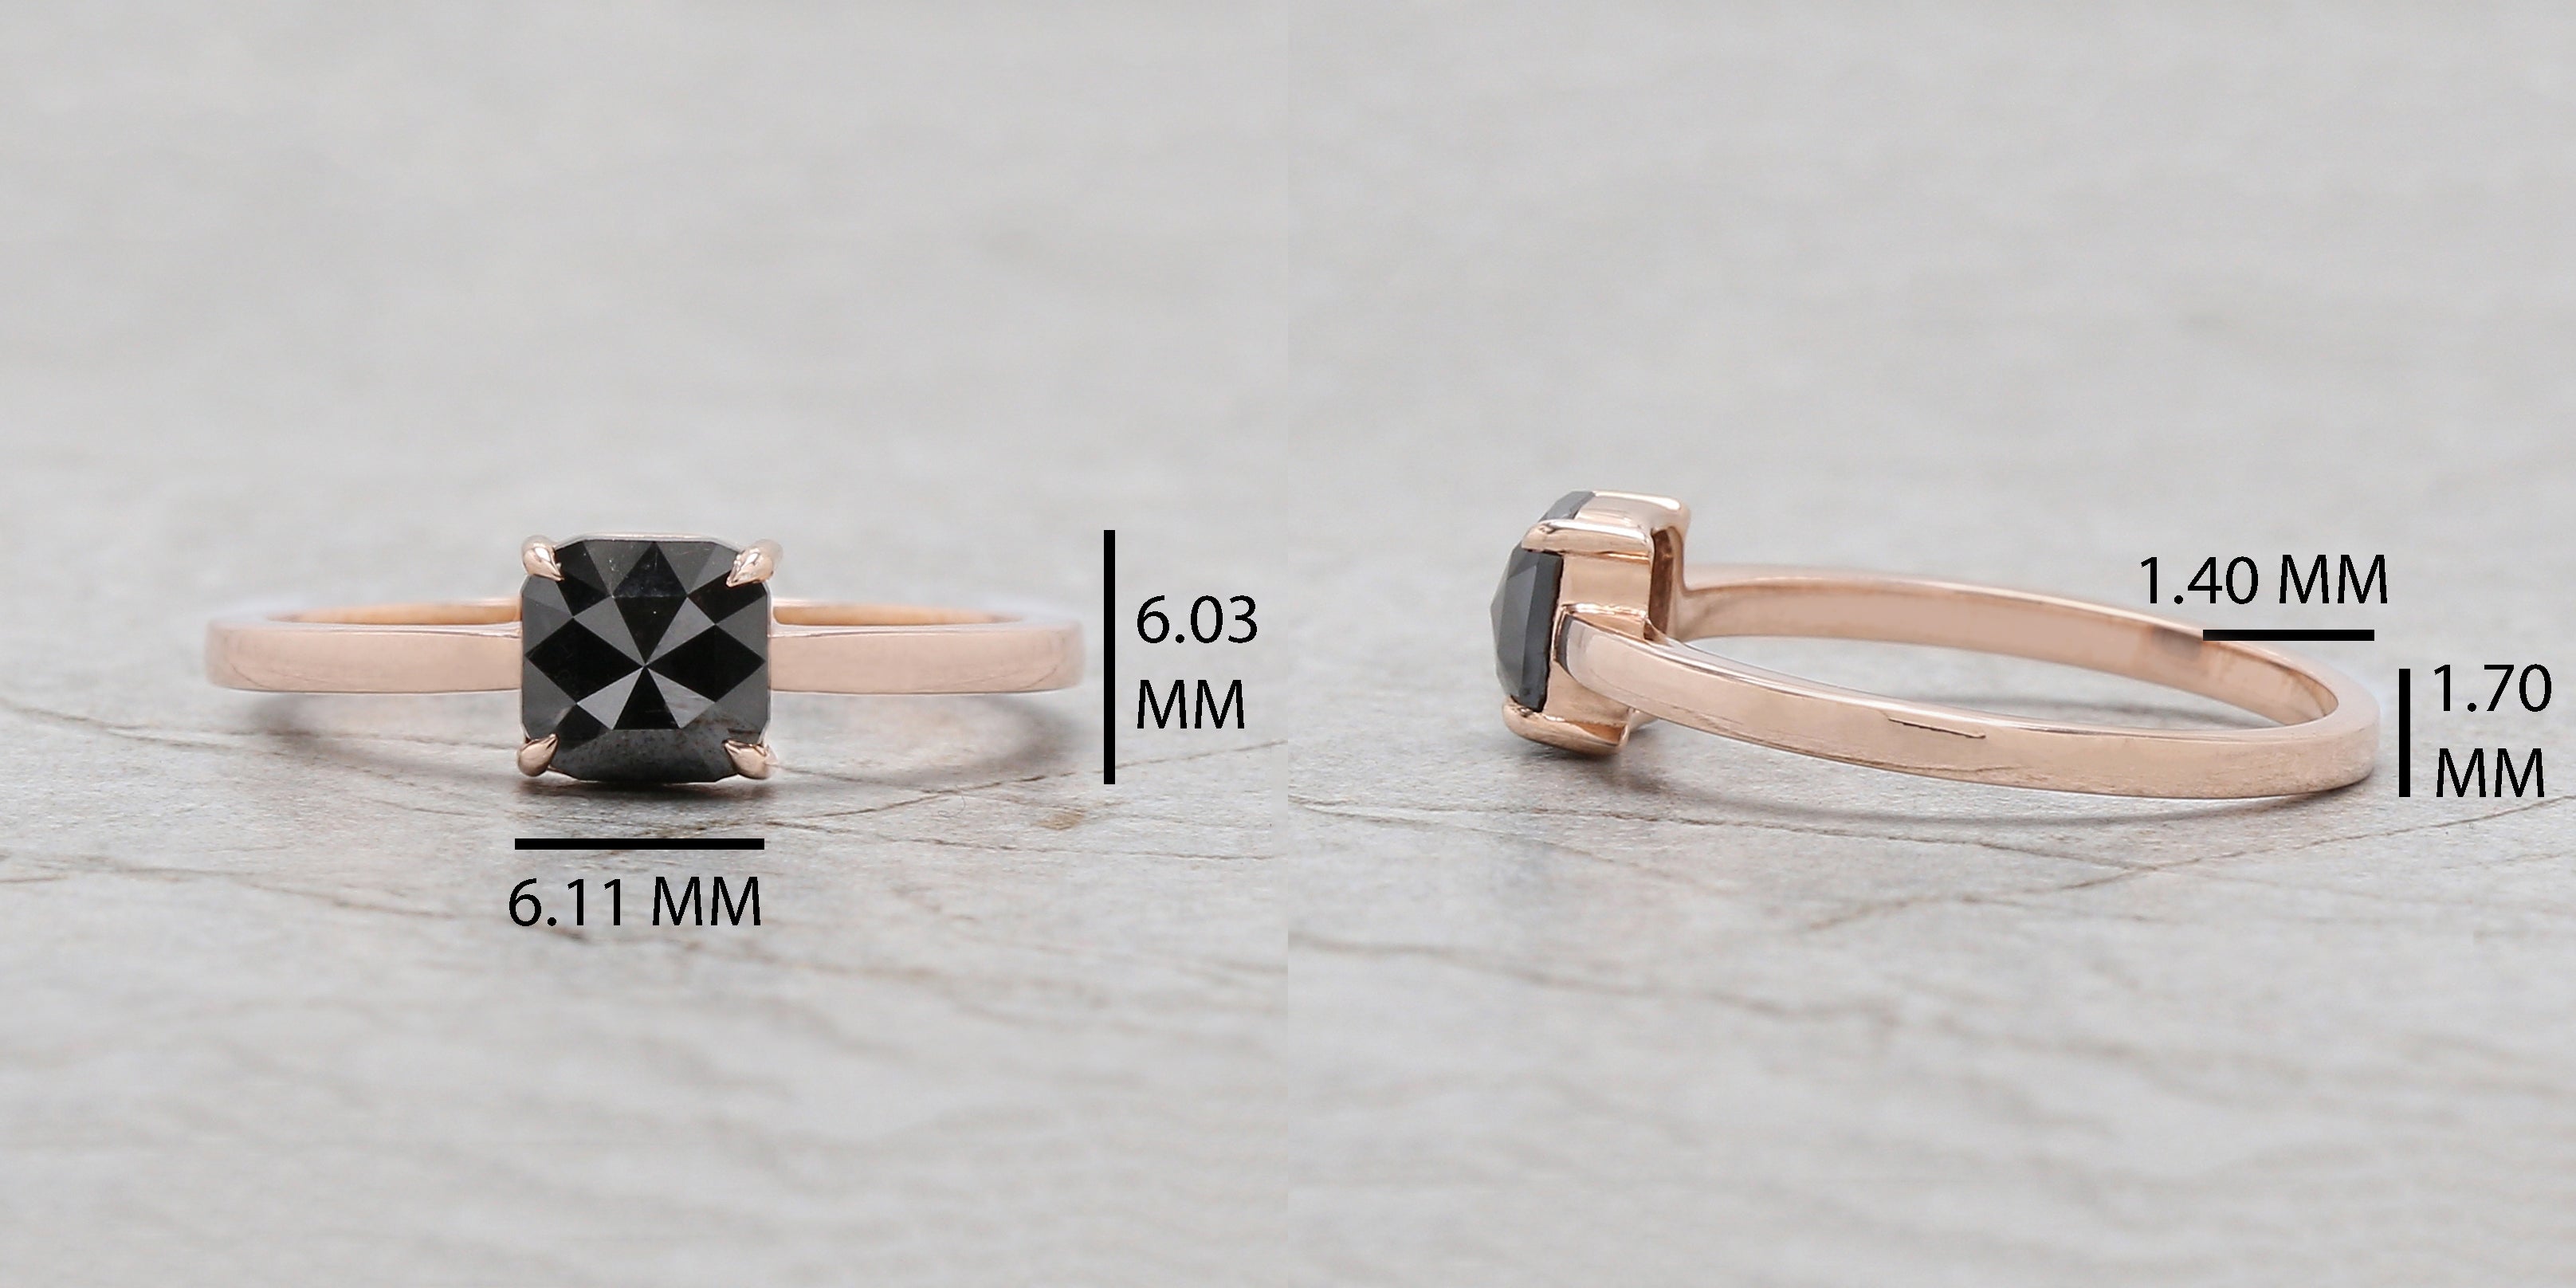 Cushion Black Color Diamond Ring Engagement Wedding Gift Ring 14K Solid Rose White Yellow Gold Ring 0.88 CT KD1065